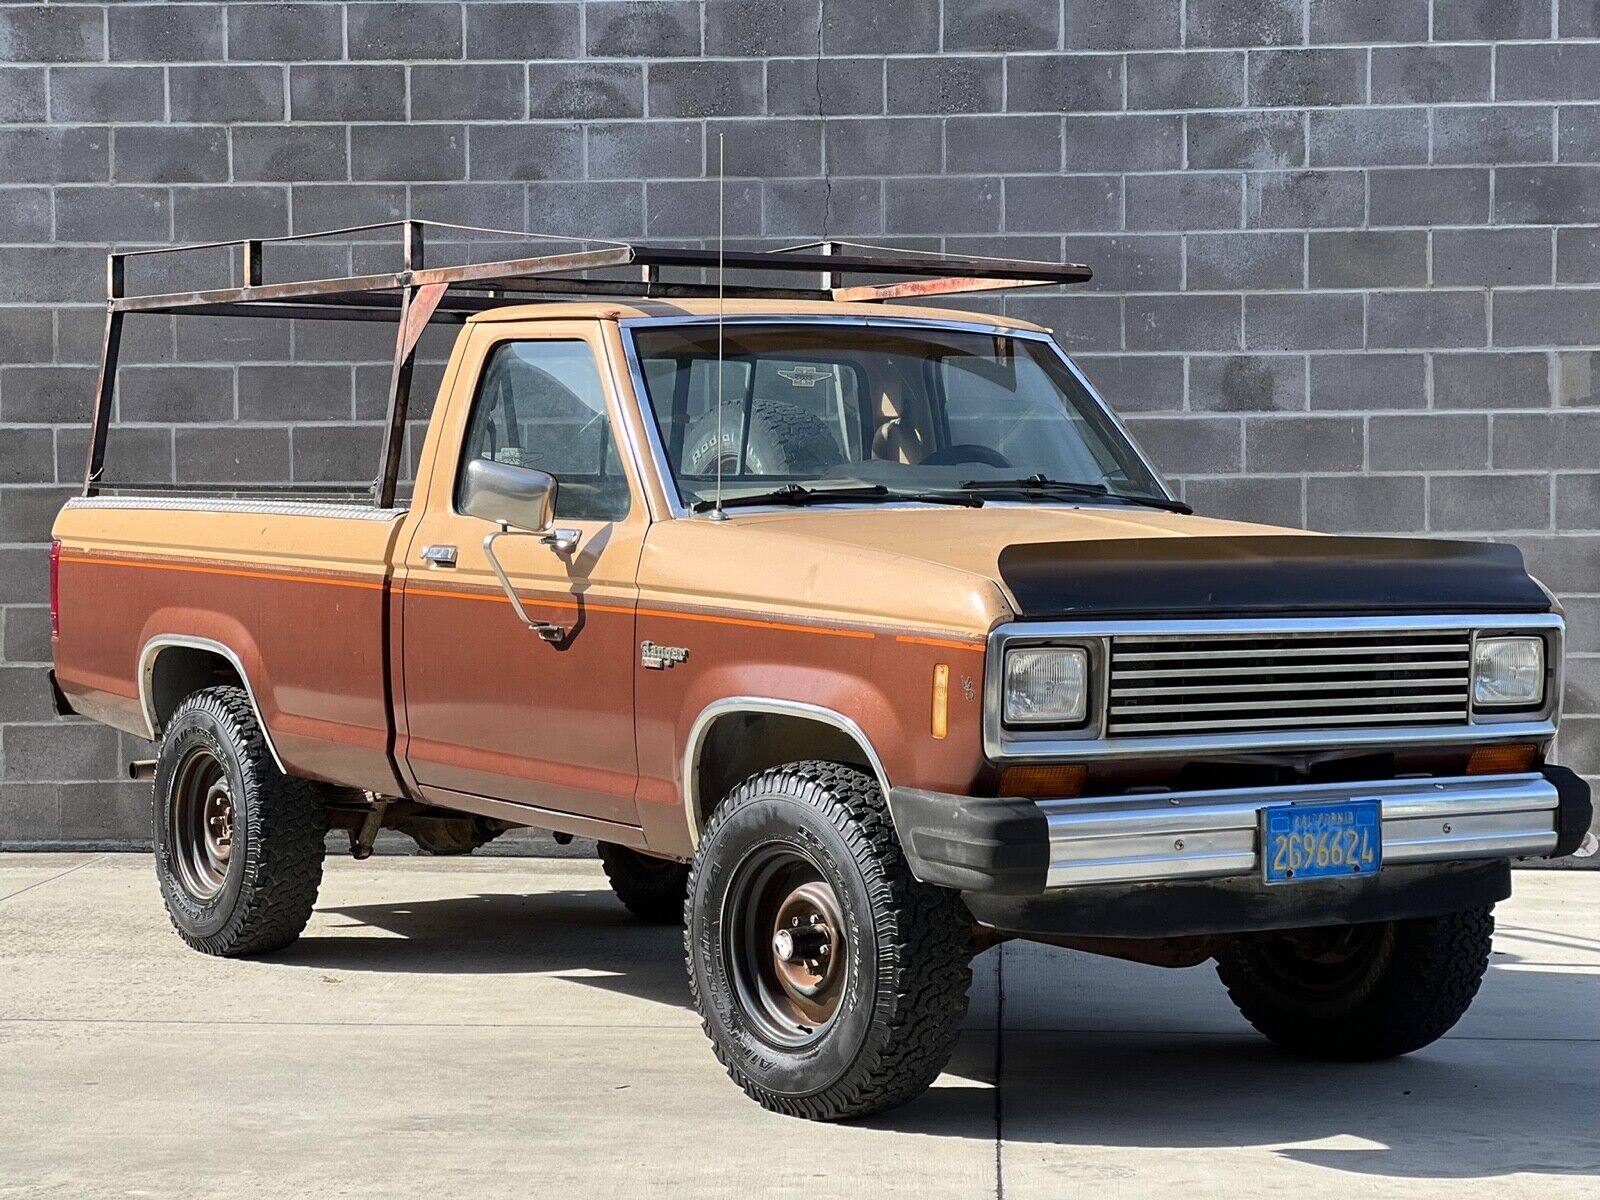 1983 Ford Ranger Is an Affordable Classic Ready for Work or Play -   Motors Blog